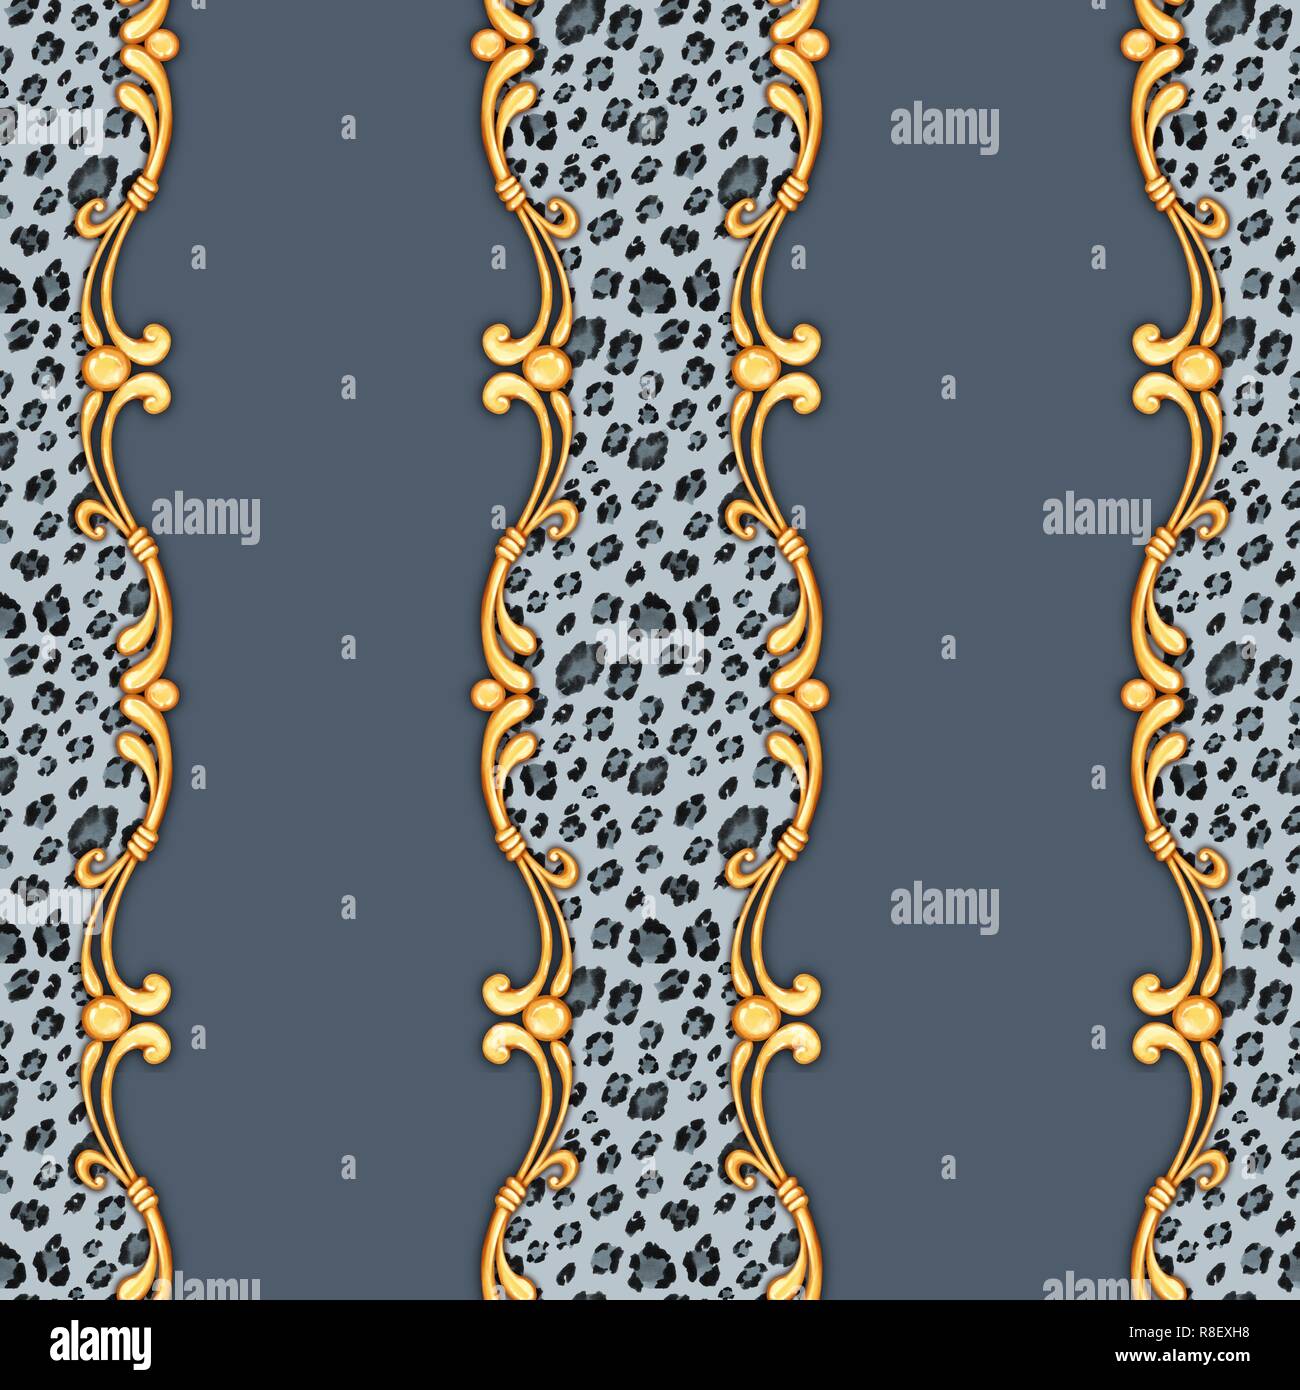 Seamless leopard pattern and golden baroque elements. Stock Photo